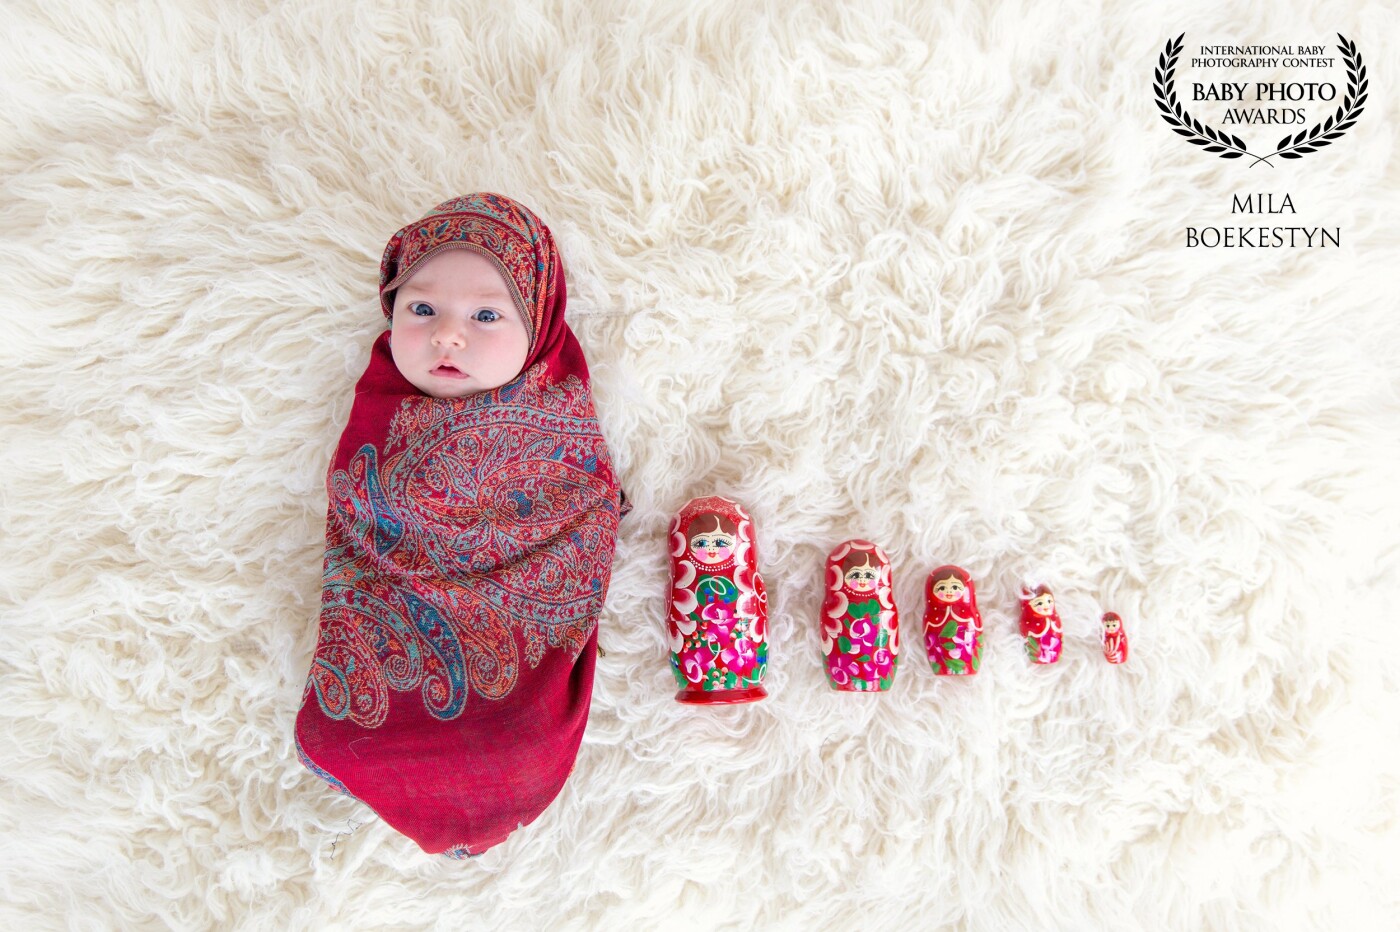 "Matryoshka". I had this image in mind for a very long time... I am originally from Russia and the name of my business - Milashka Photography is a loose translation from Russian as a “cutie” or “sweetheart”. This image of "Matryoshka" aka "Russian doll" is a perfect combination of my background and the name of my business and of course it is always great when you have a super adorable and cooperative newborn that looks right at the camera at the right moment!